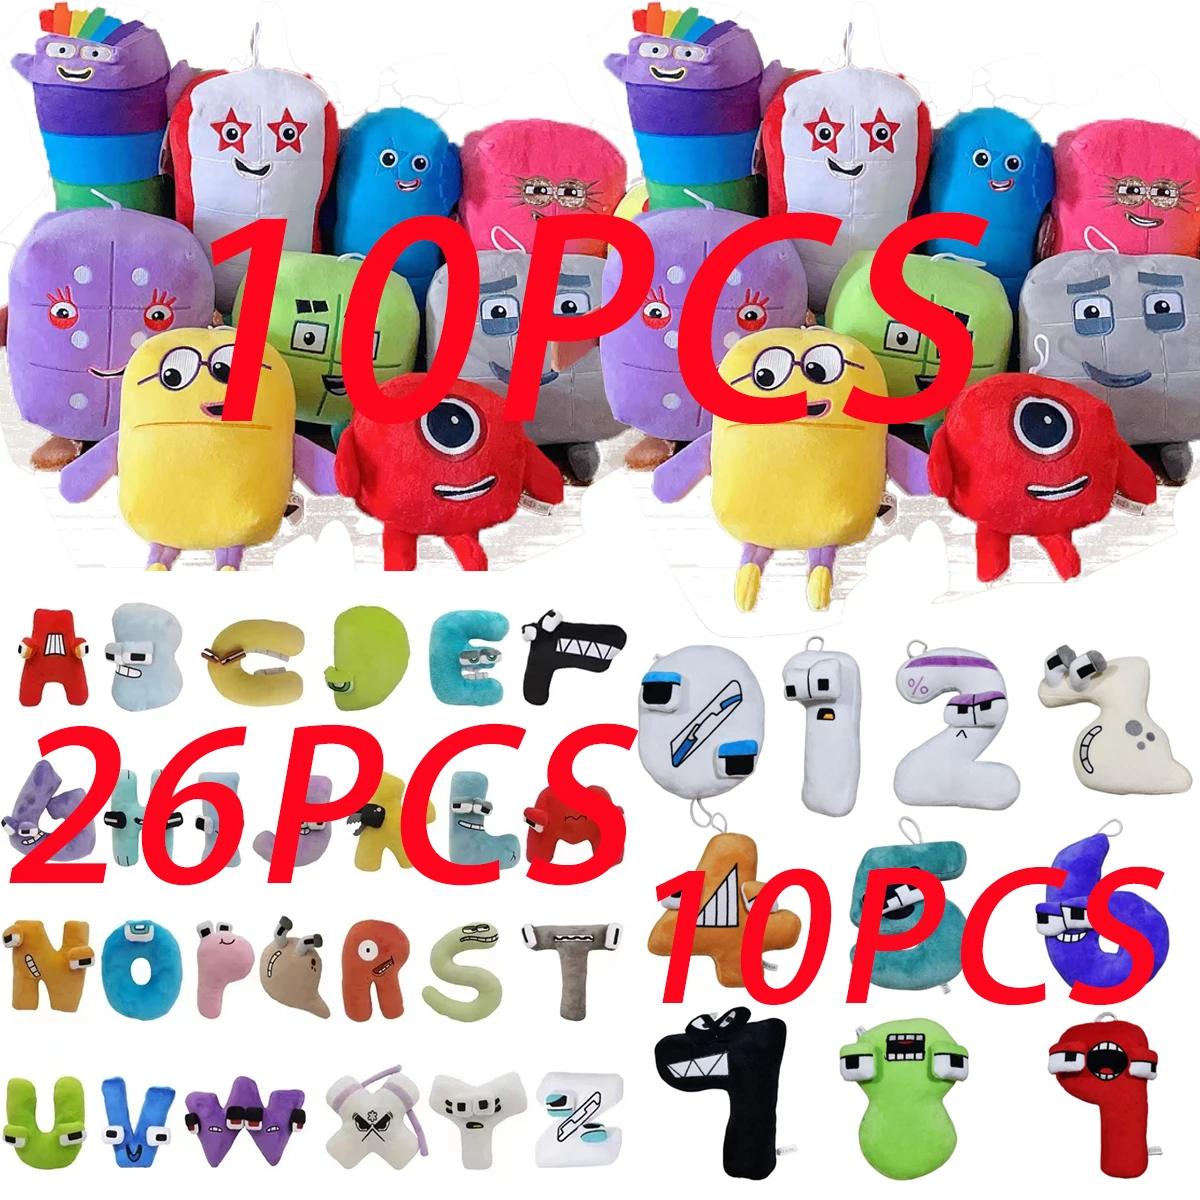 Alphabet Lore Plush Toys 0-9 Number Animal Plushie Education Numberblock  Doll For Kids Children Christmas Xmall Gift